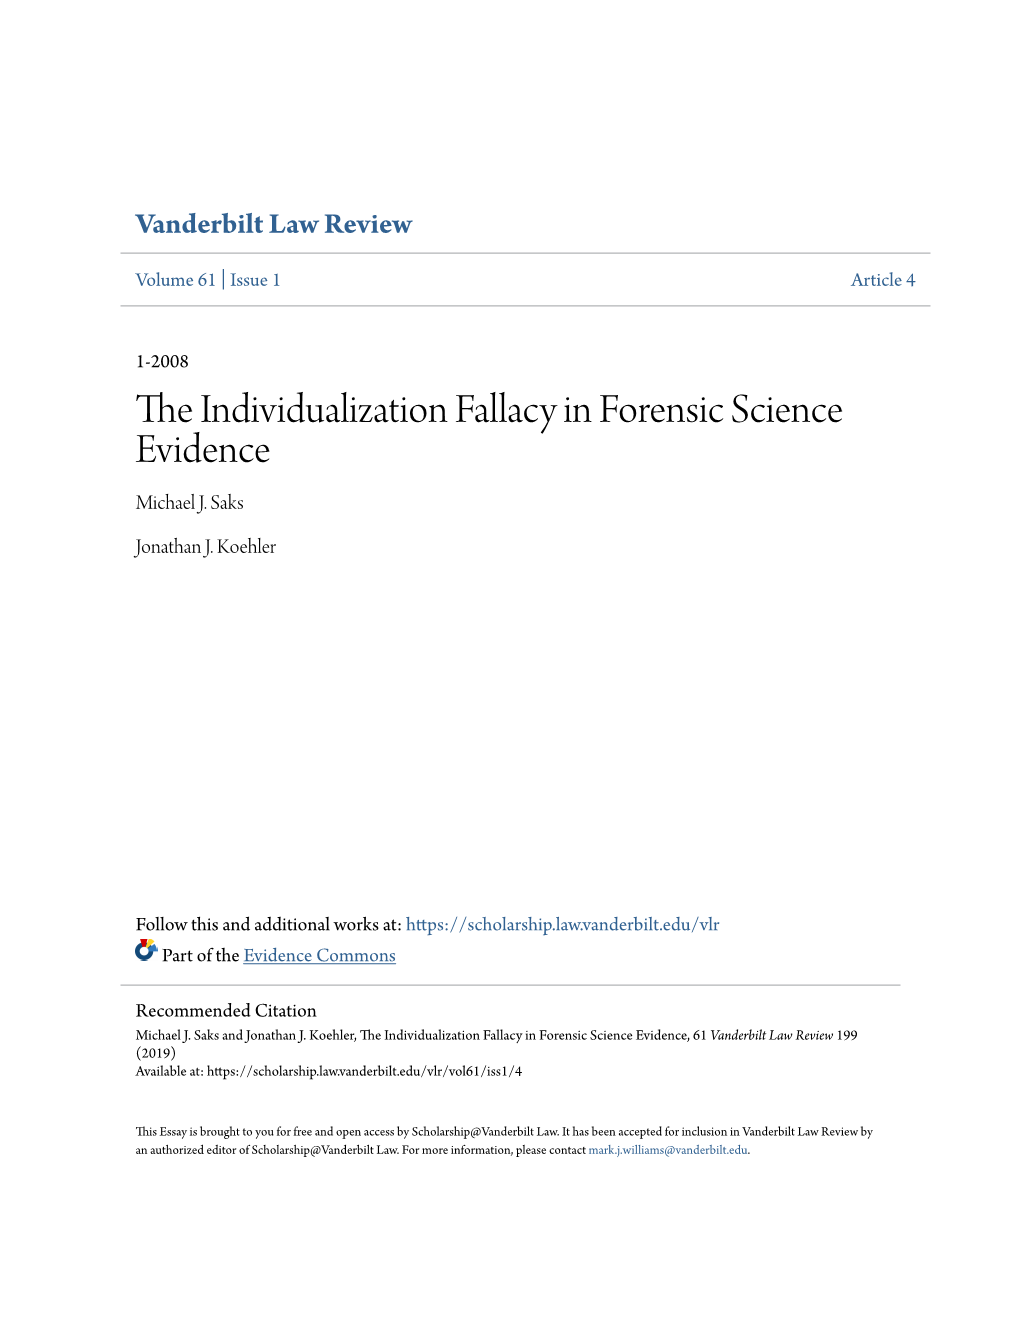 The Individualization Fallacy in Forensic Science Evidence